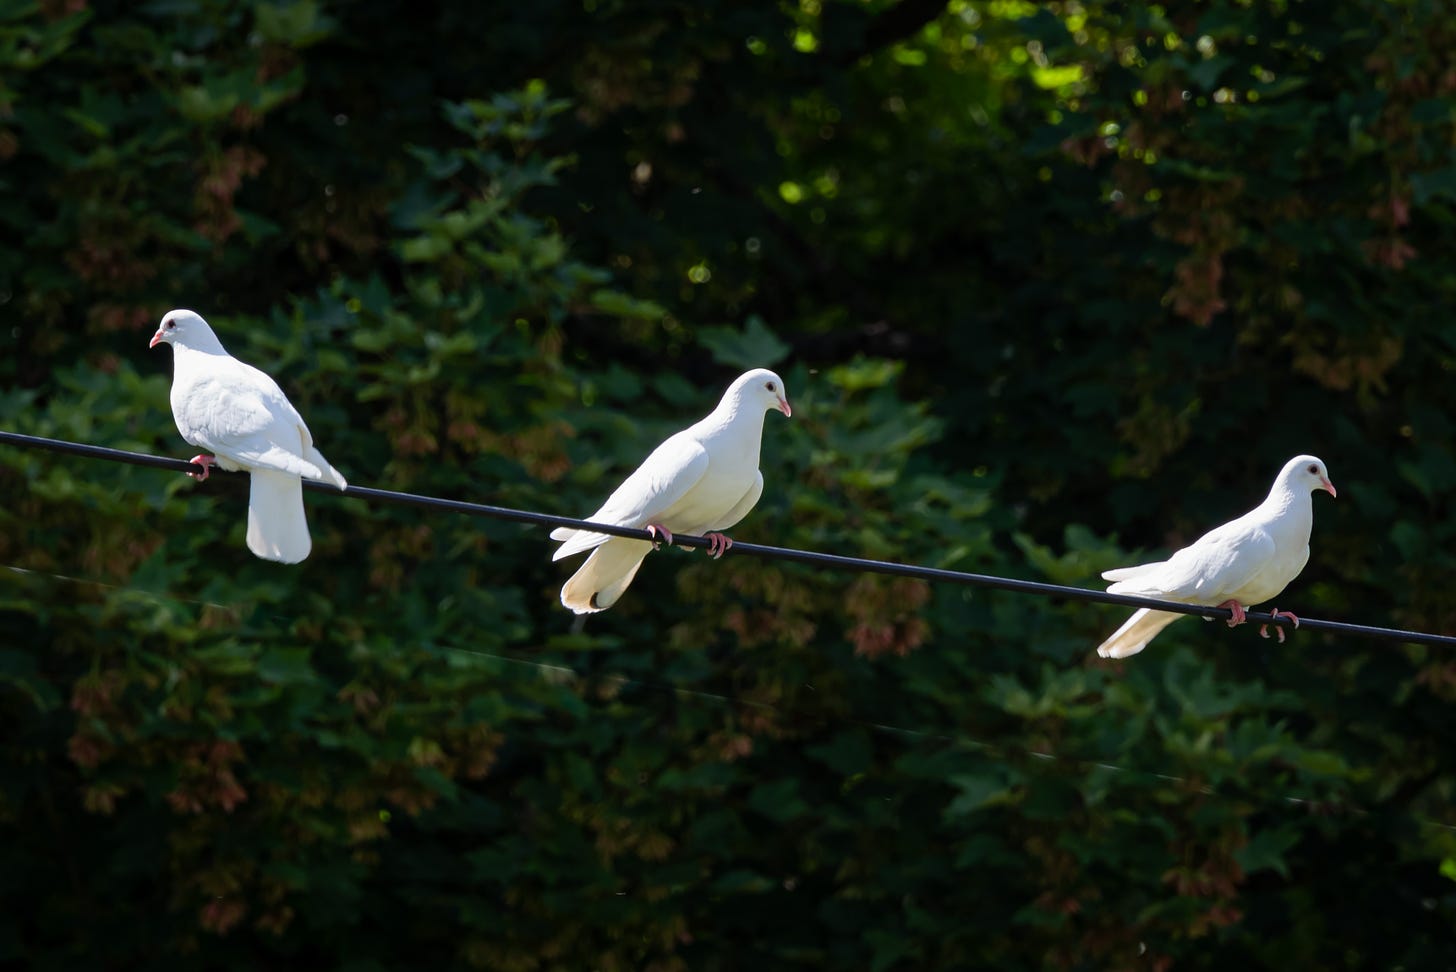 Three white doves siting on a wire with trees in the background